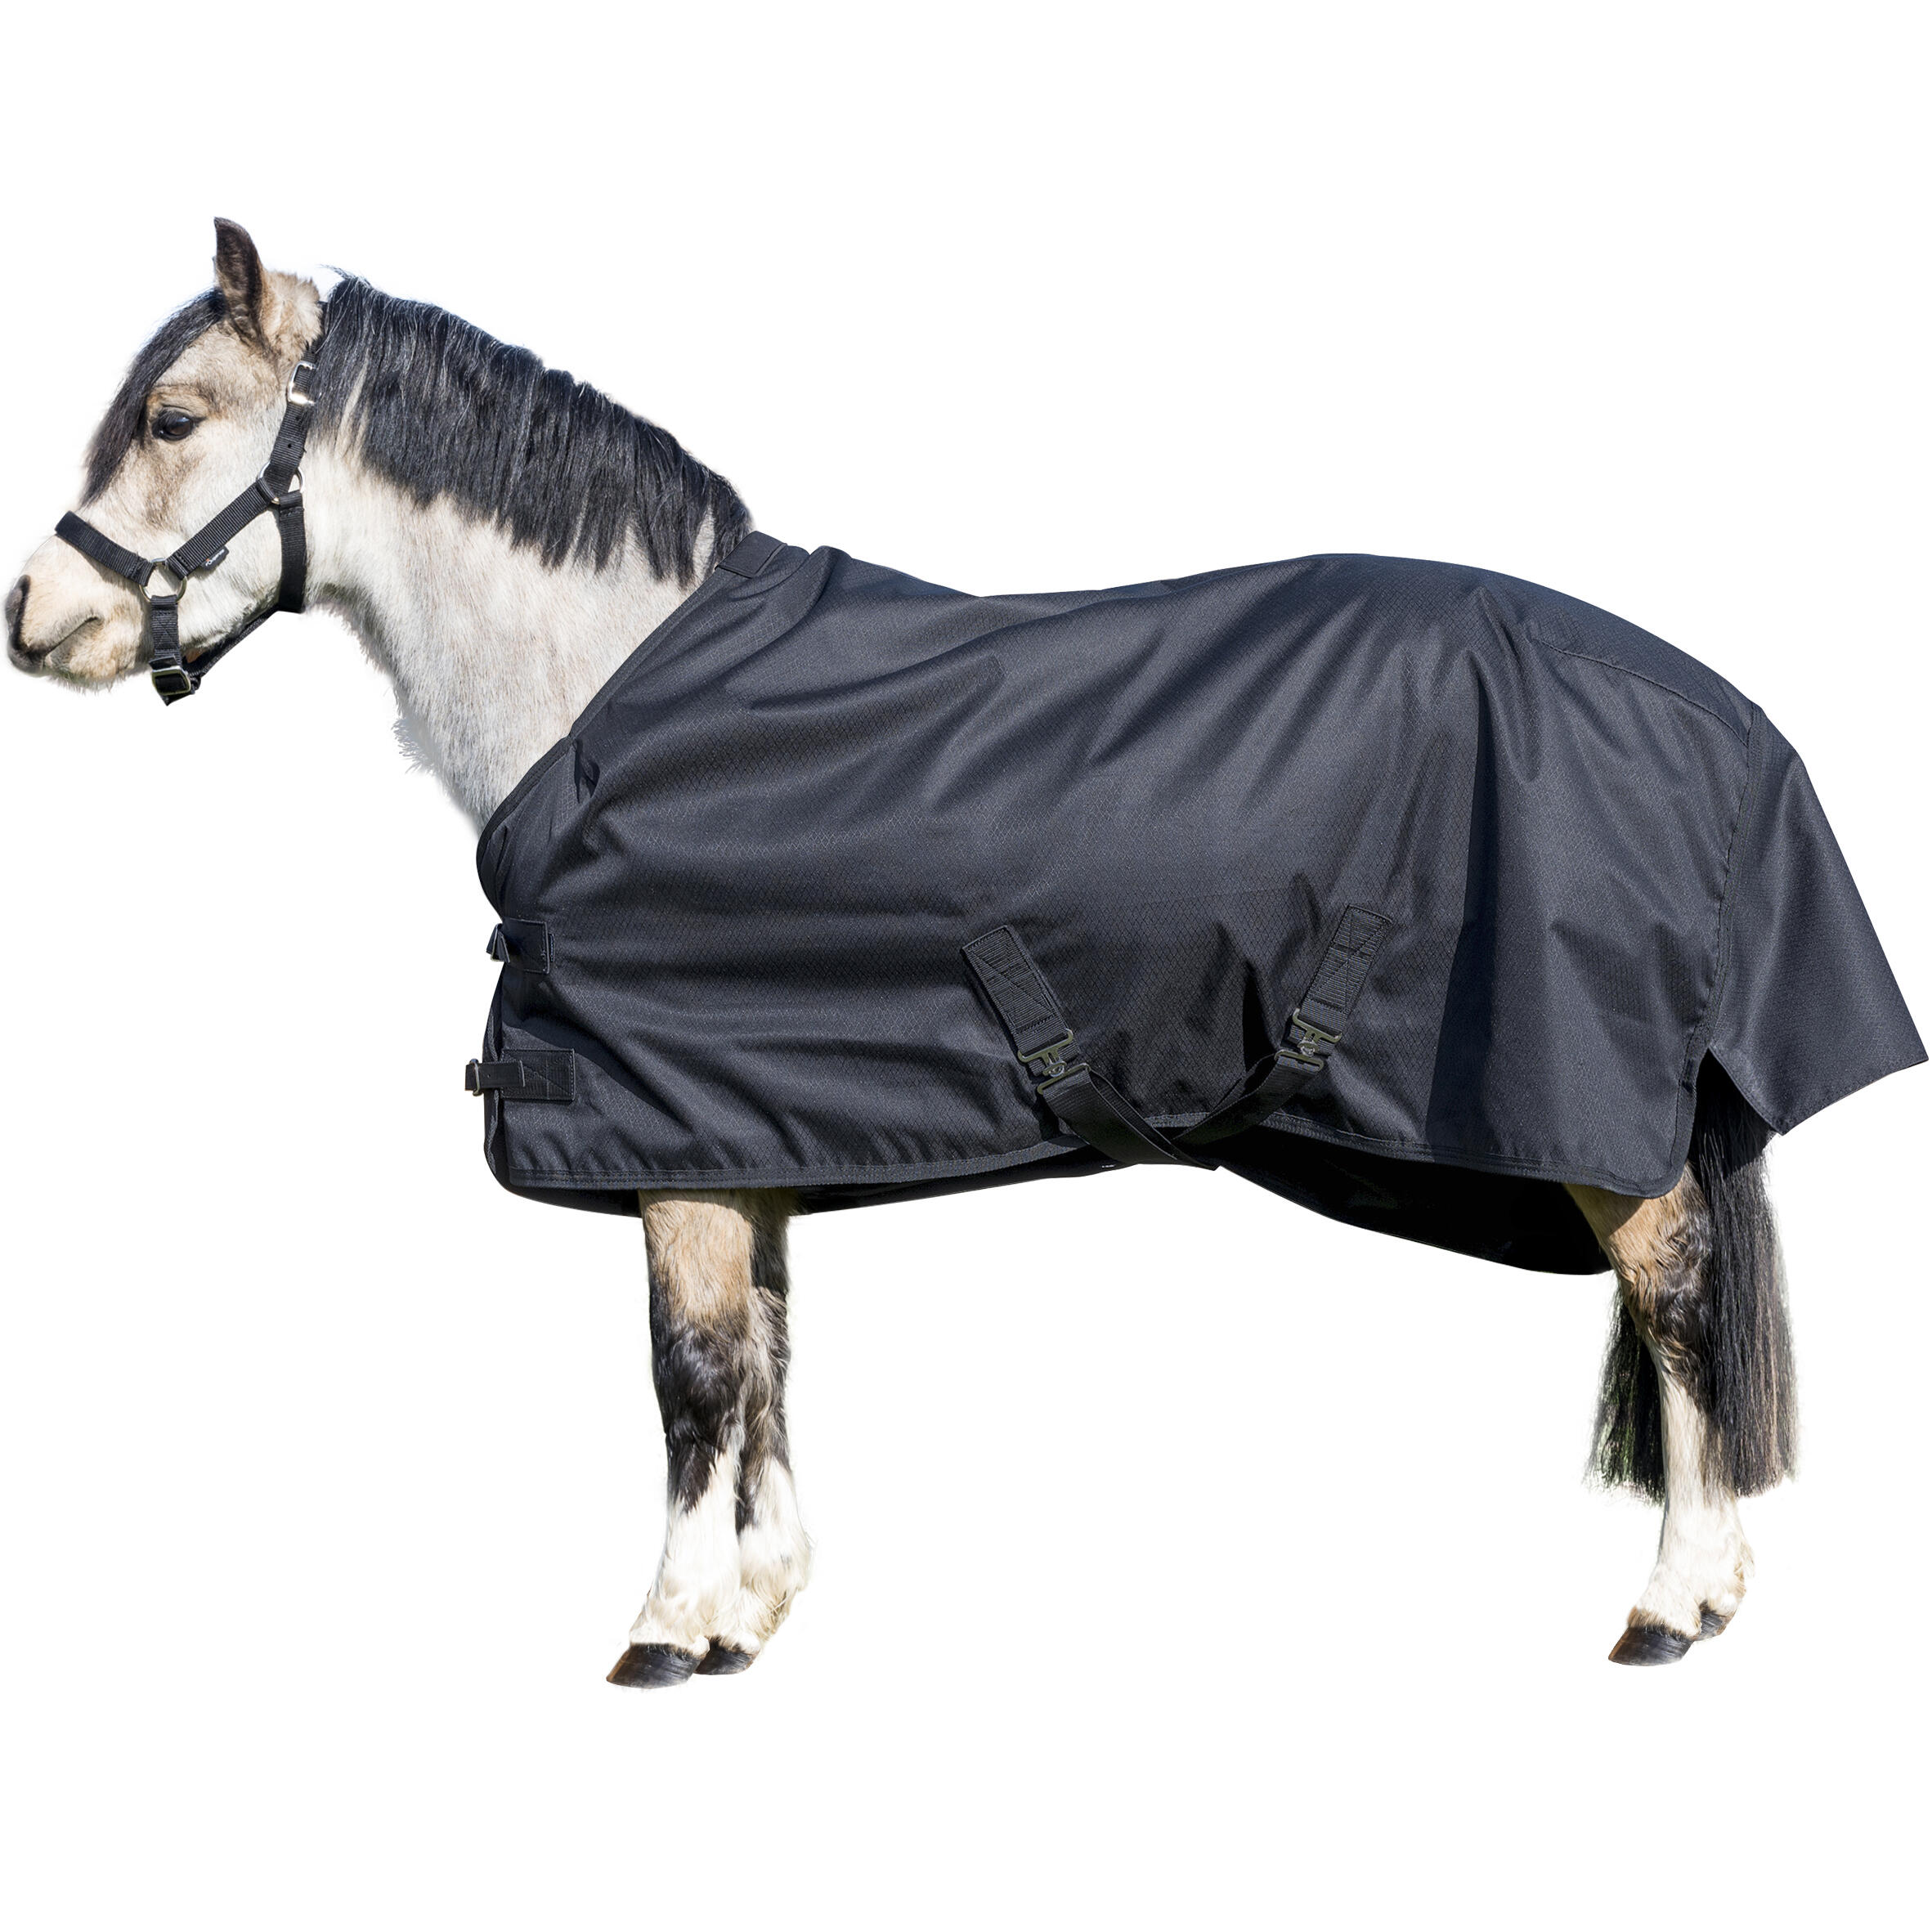 FOUGANZA Imper 200 600D Horse Riding Rug For Pony - Black